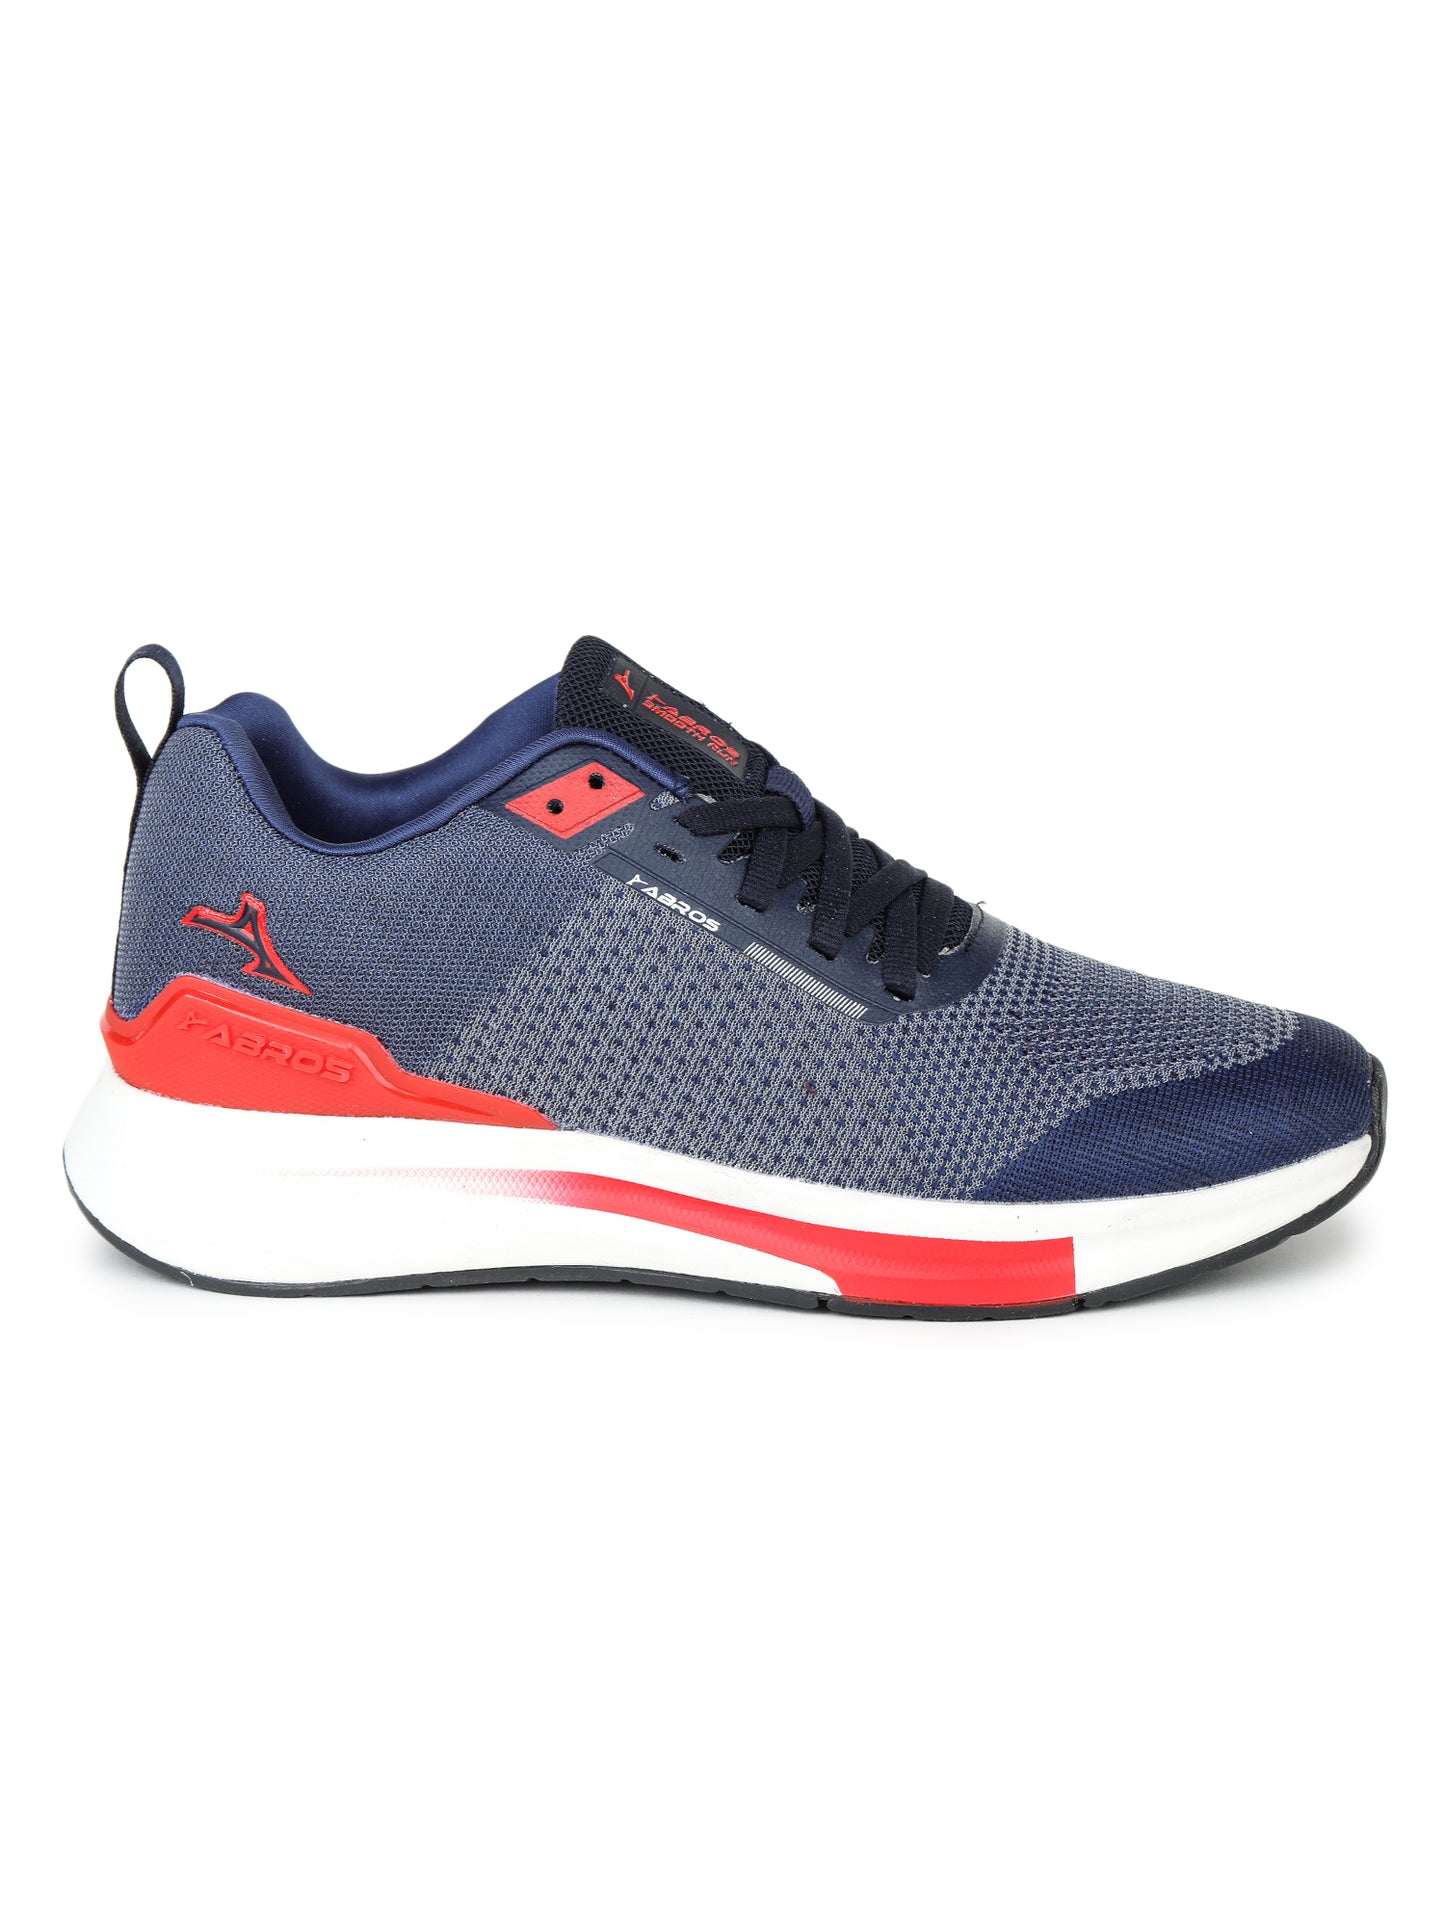 ABROS MUSTANG-PRO SPORT-SHOES For MEN'S